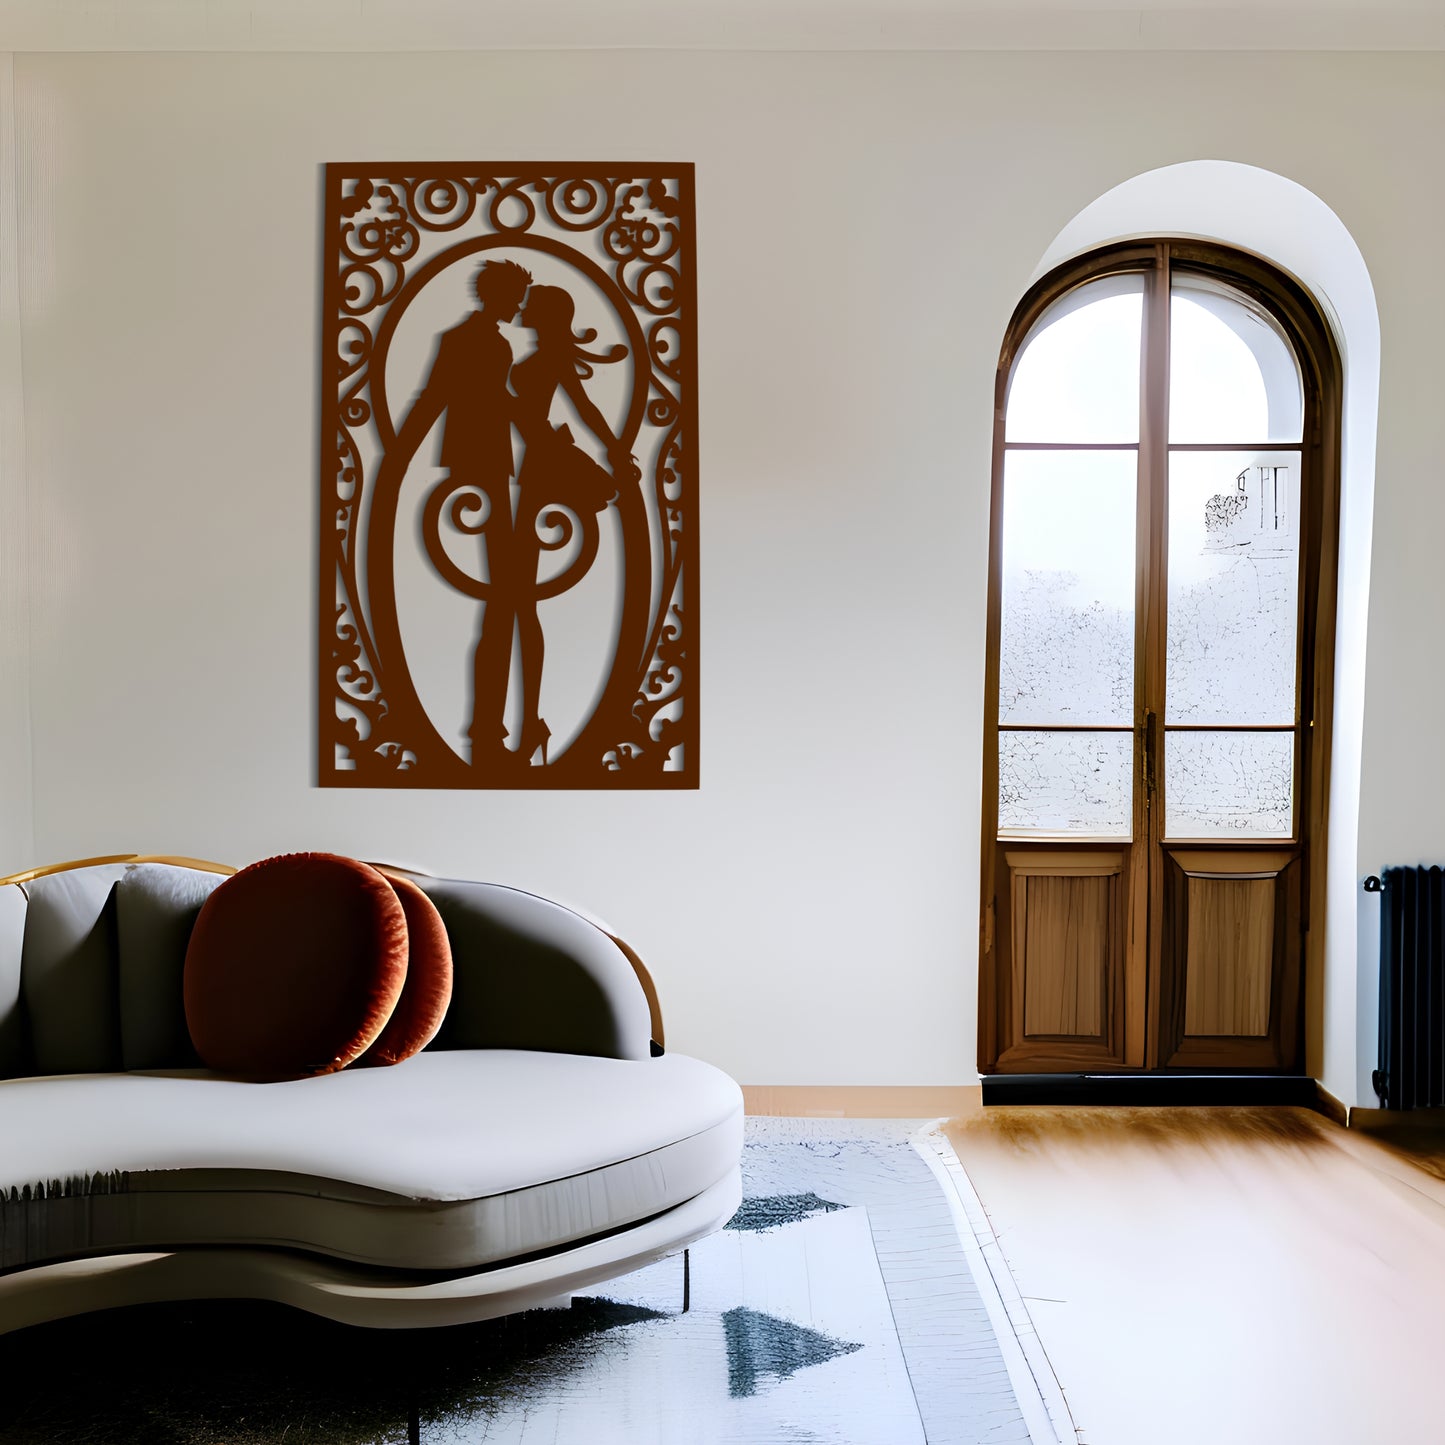 Silhouette of Man and Woman Kissing Wall Decor